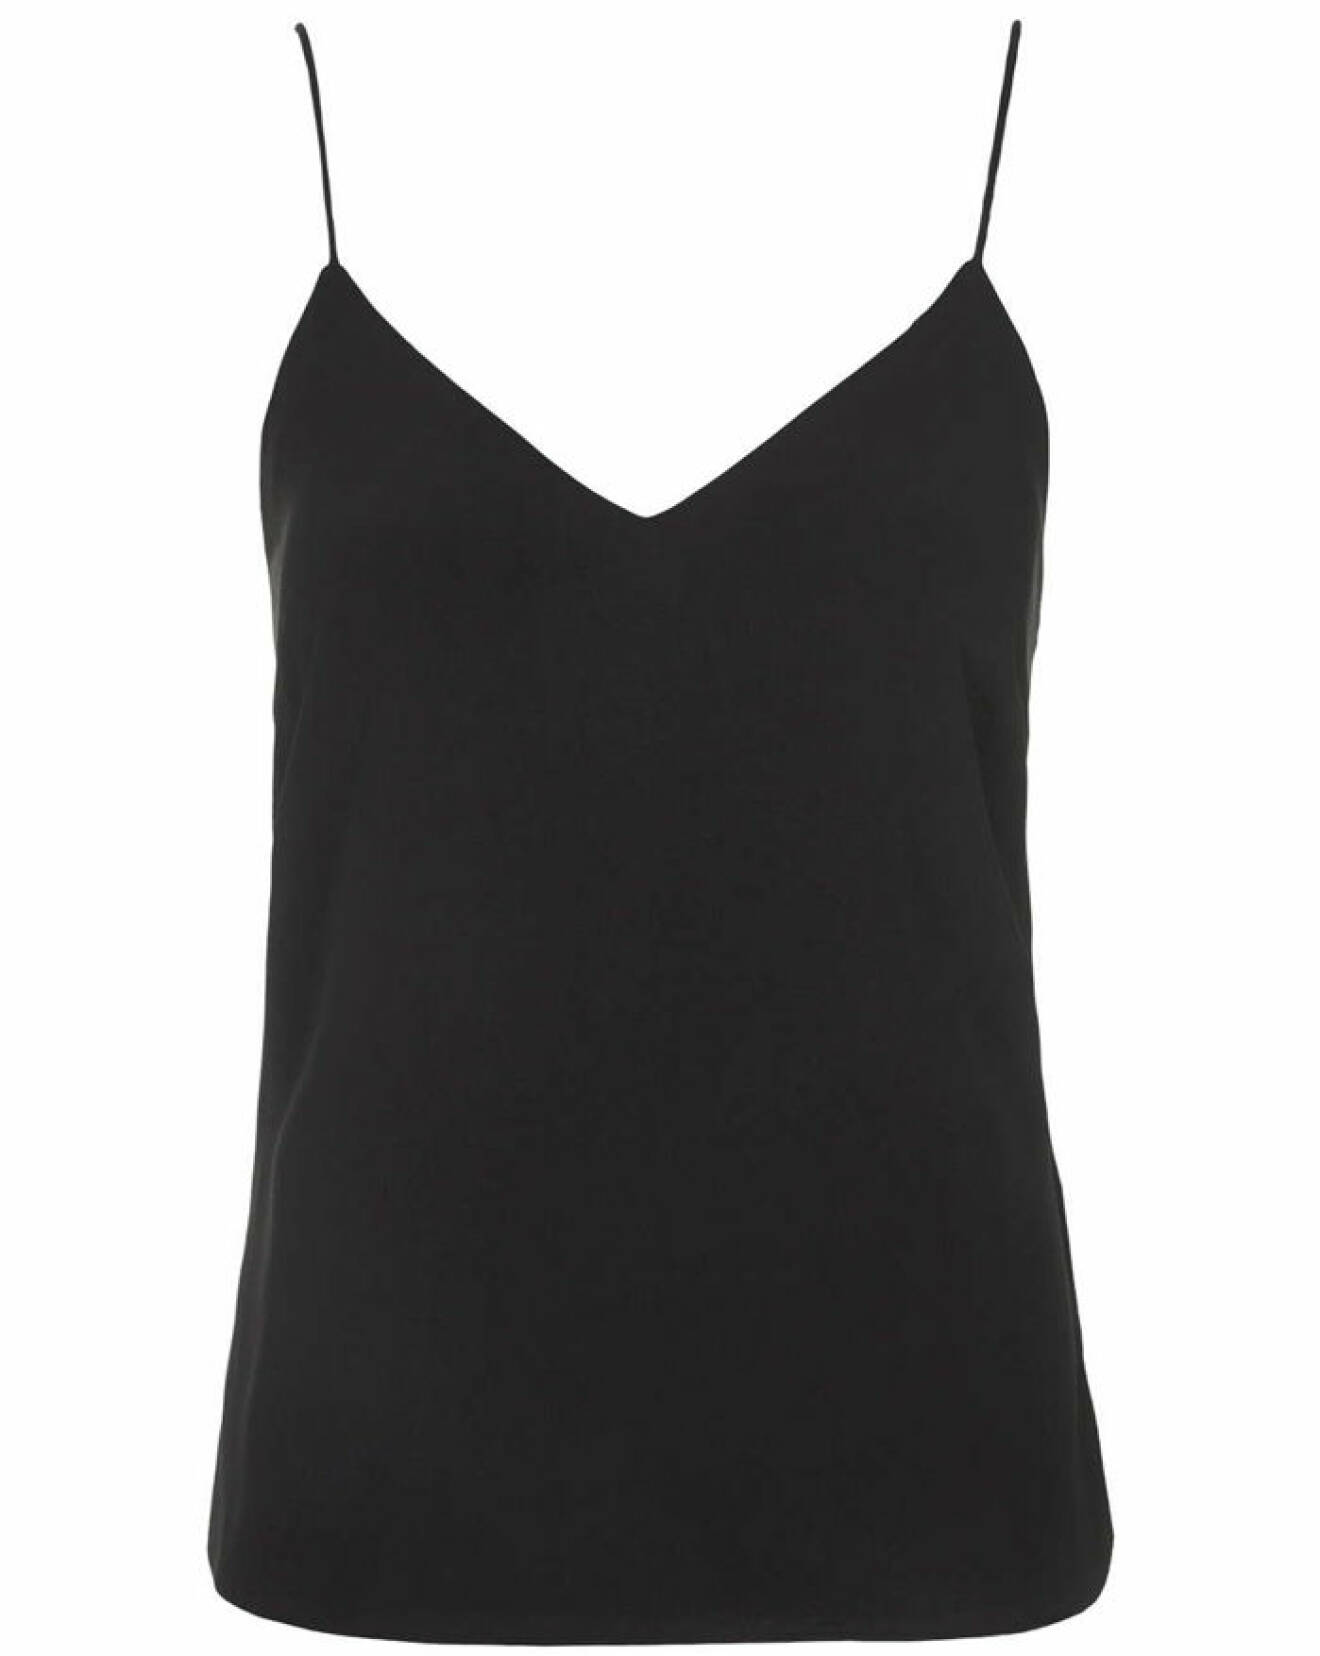 4. Linne, 1134 kr, MEO Collective Topshop